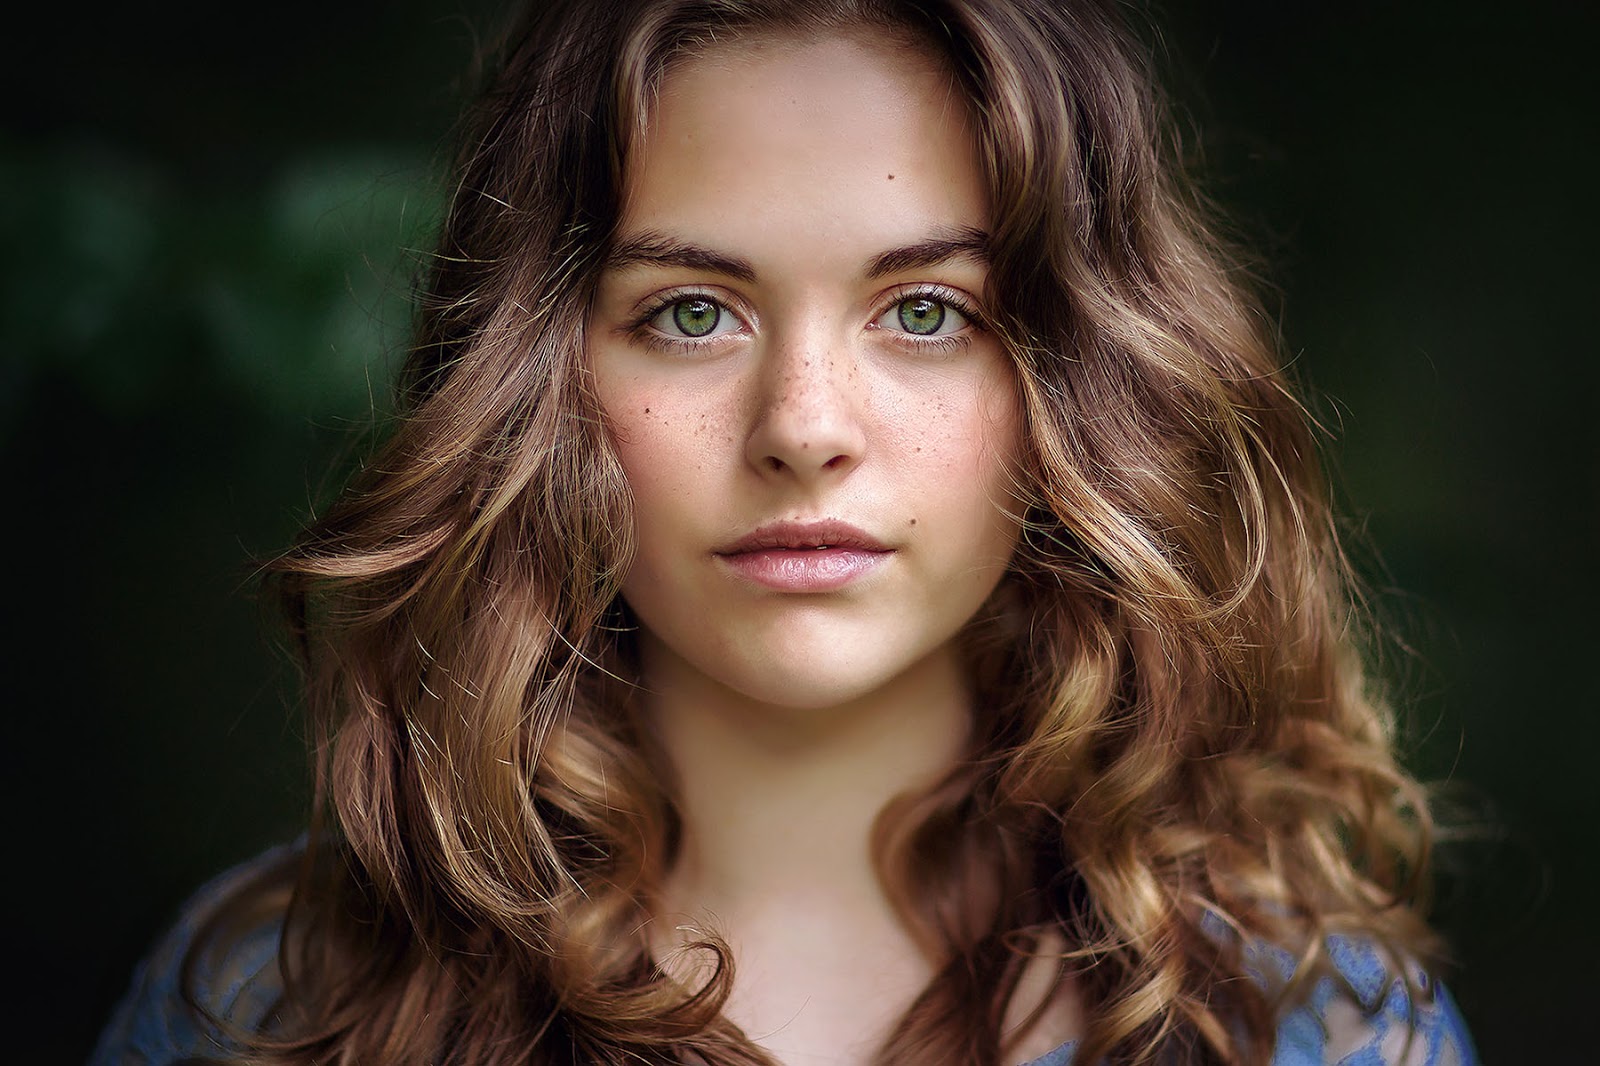 Canon portrait of a young woman with freckles by Willie Kers